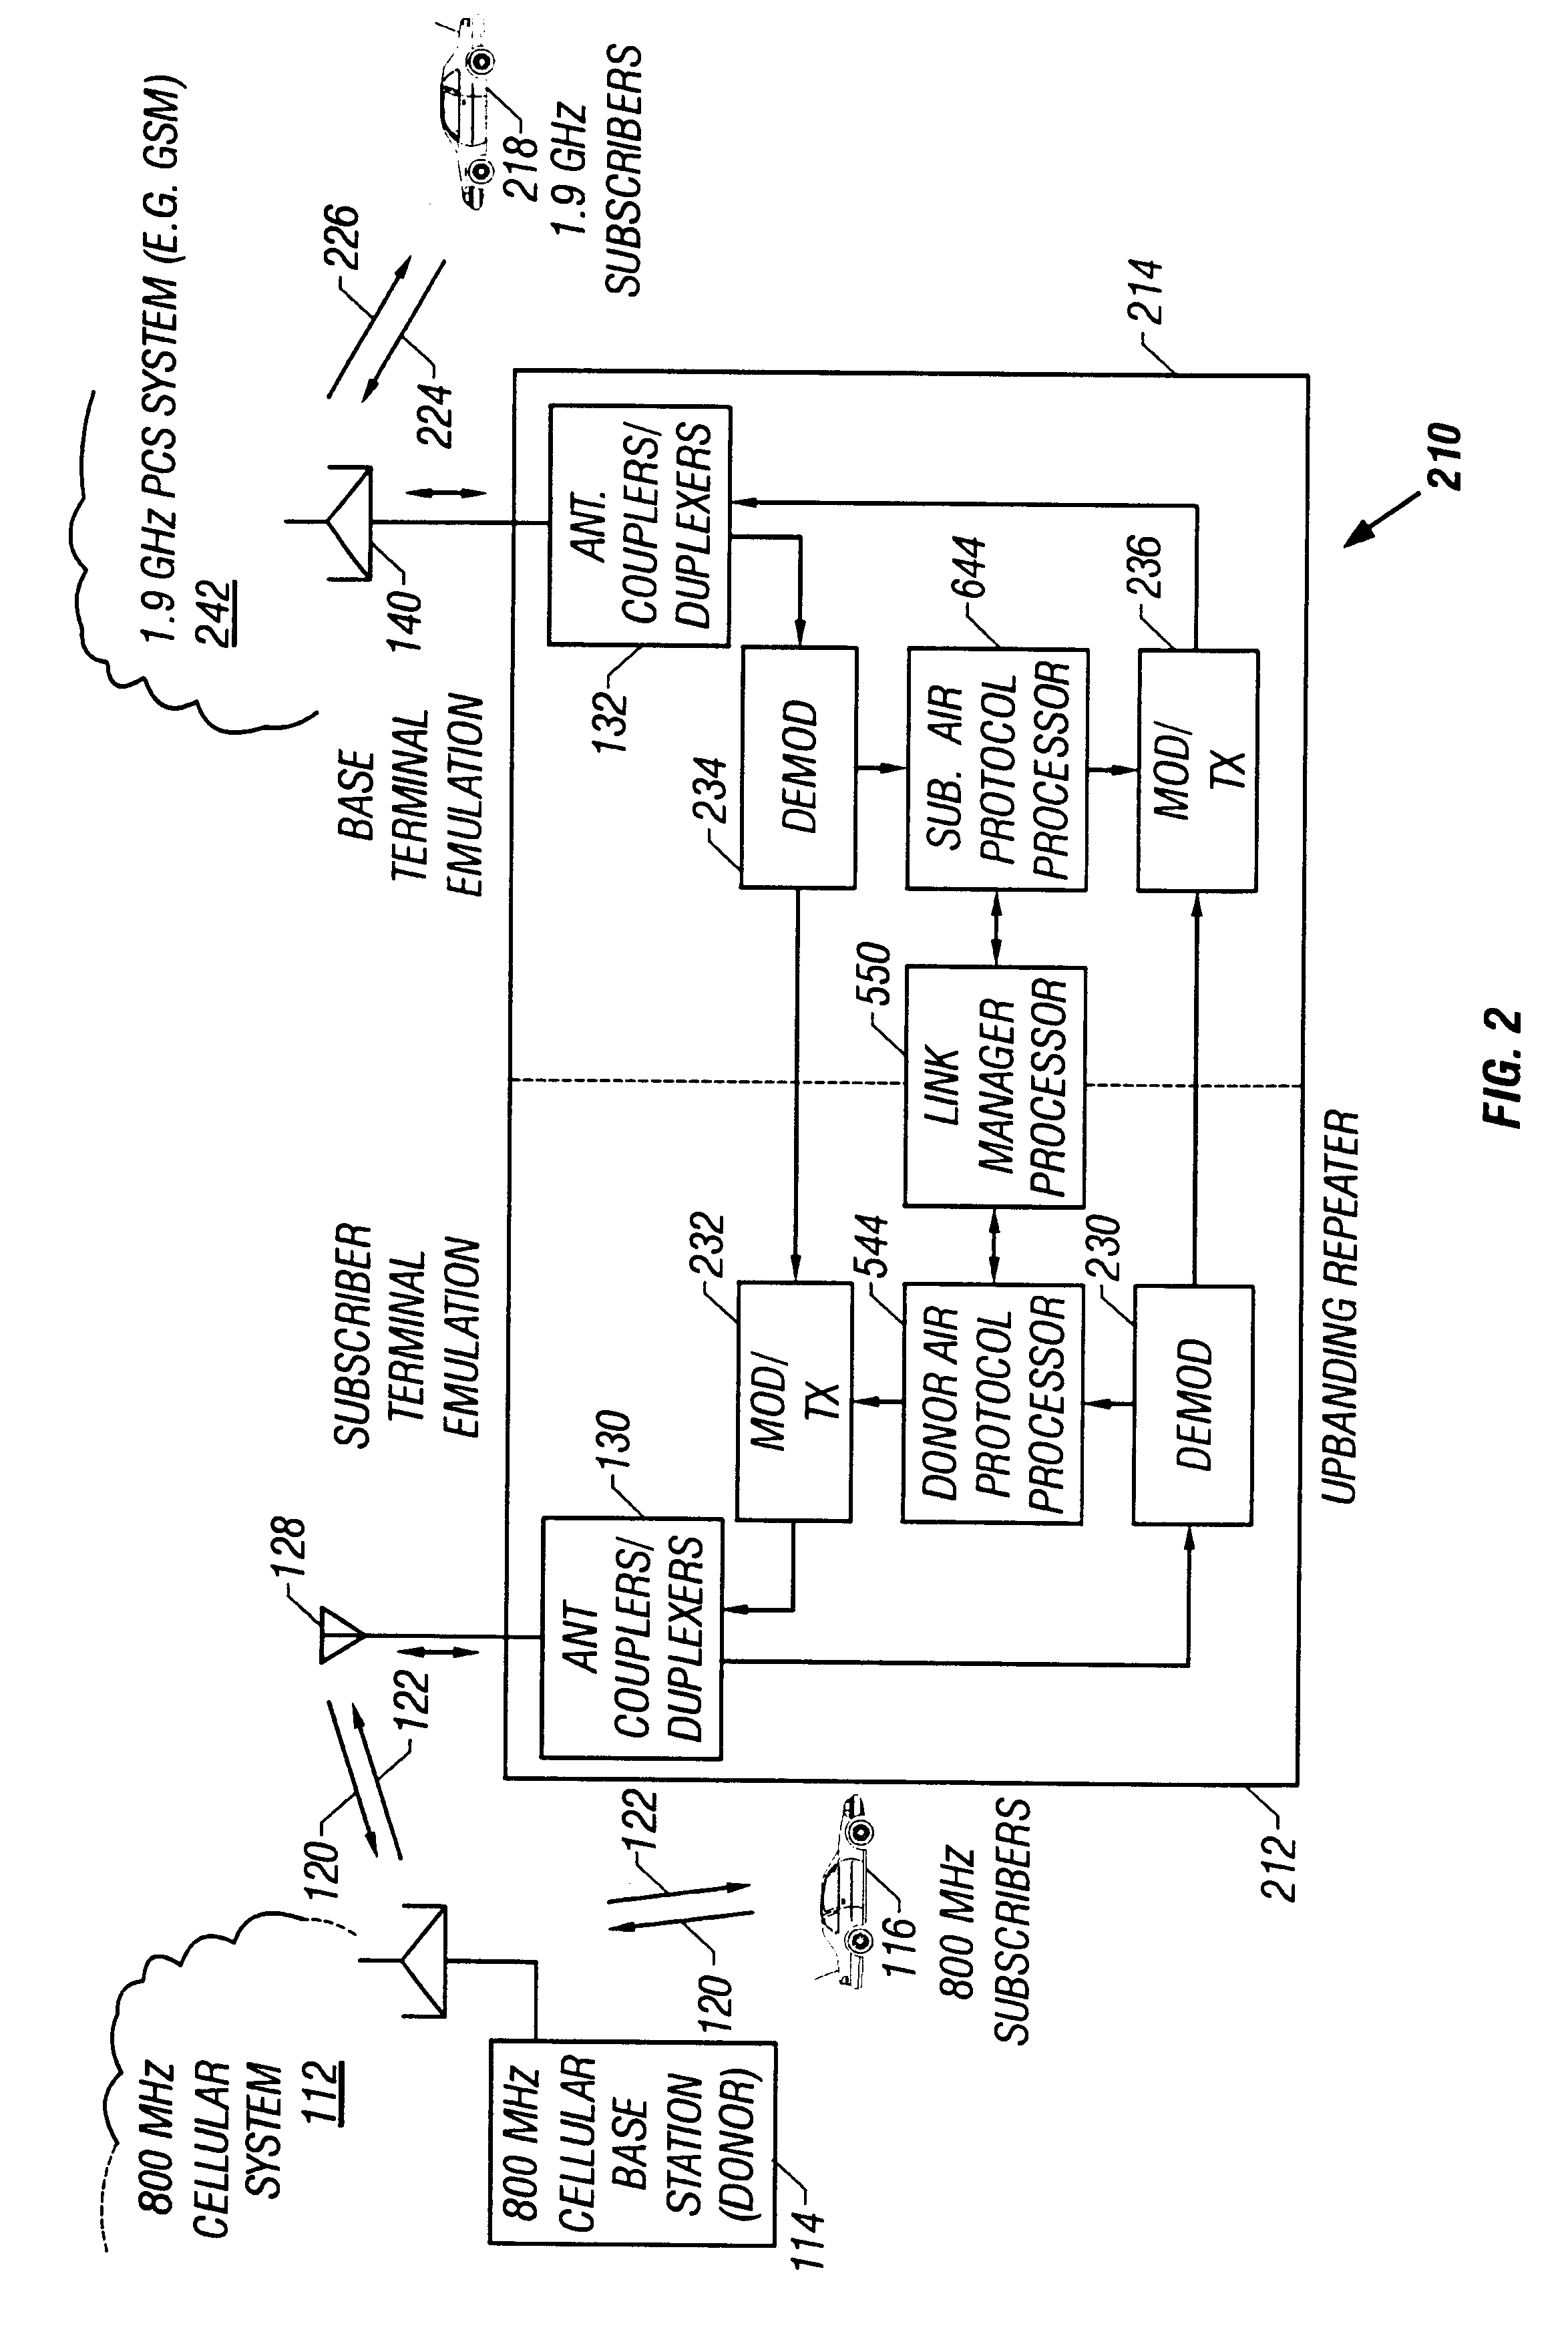 Band-changing repeater with protocol or format conversion